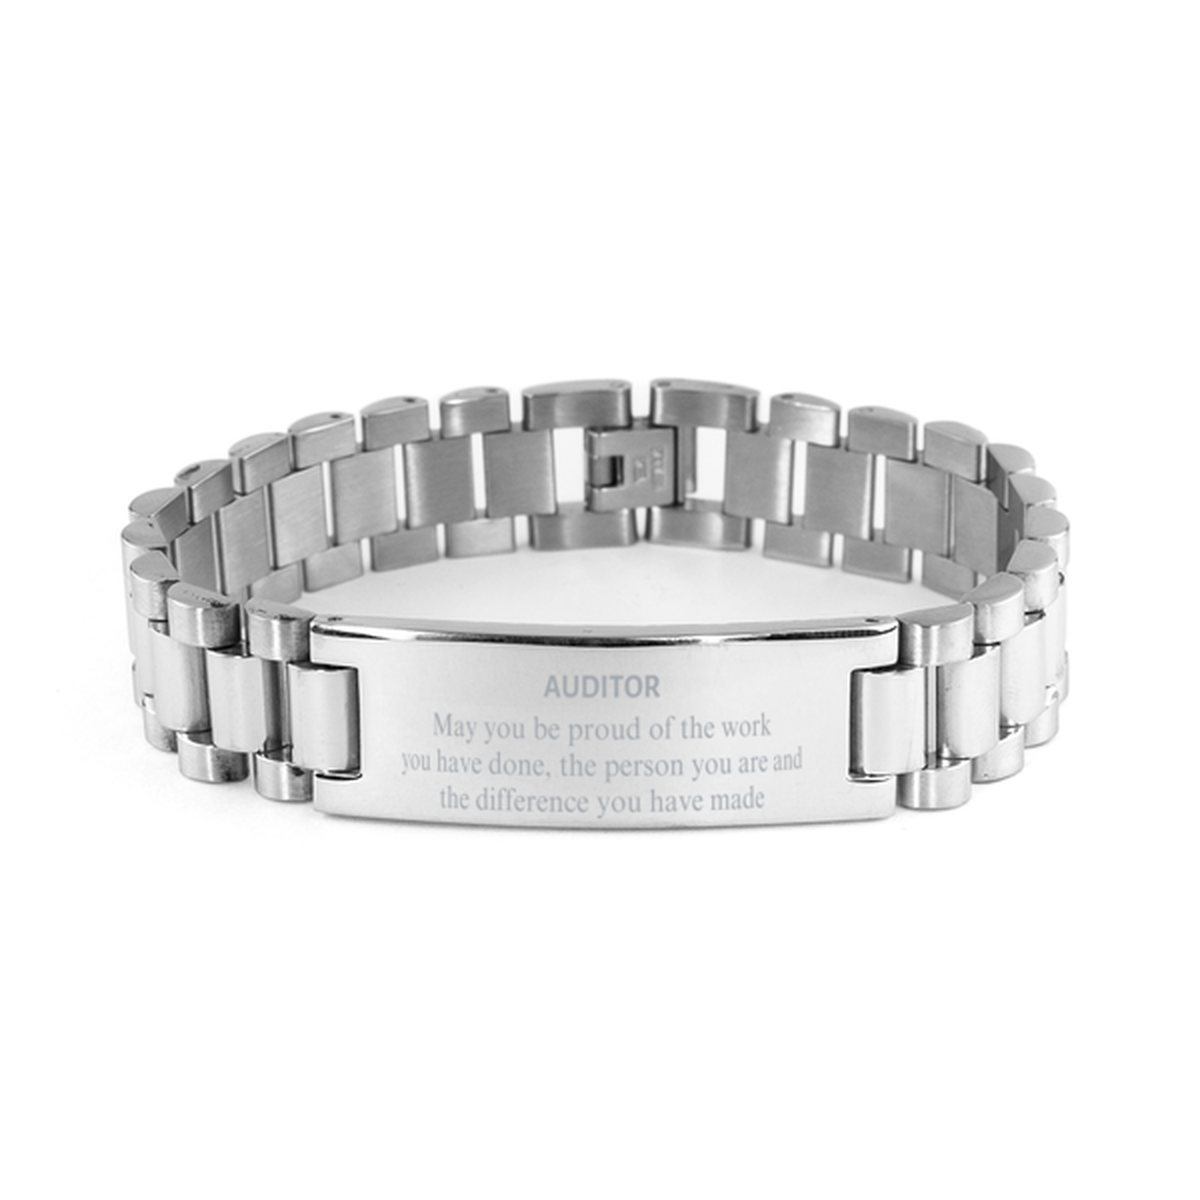 Auditor May you be proud of the work you have done, Retirement Auditor Ladder Stainless Steel Bracelet for Colleague Appreciation Gifts Amazing for Auditor